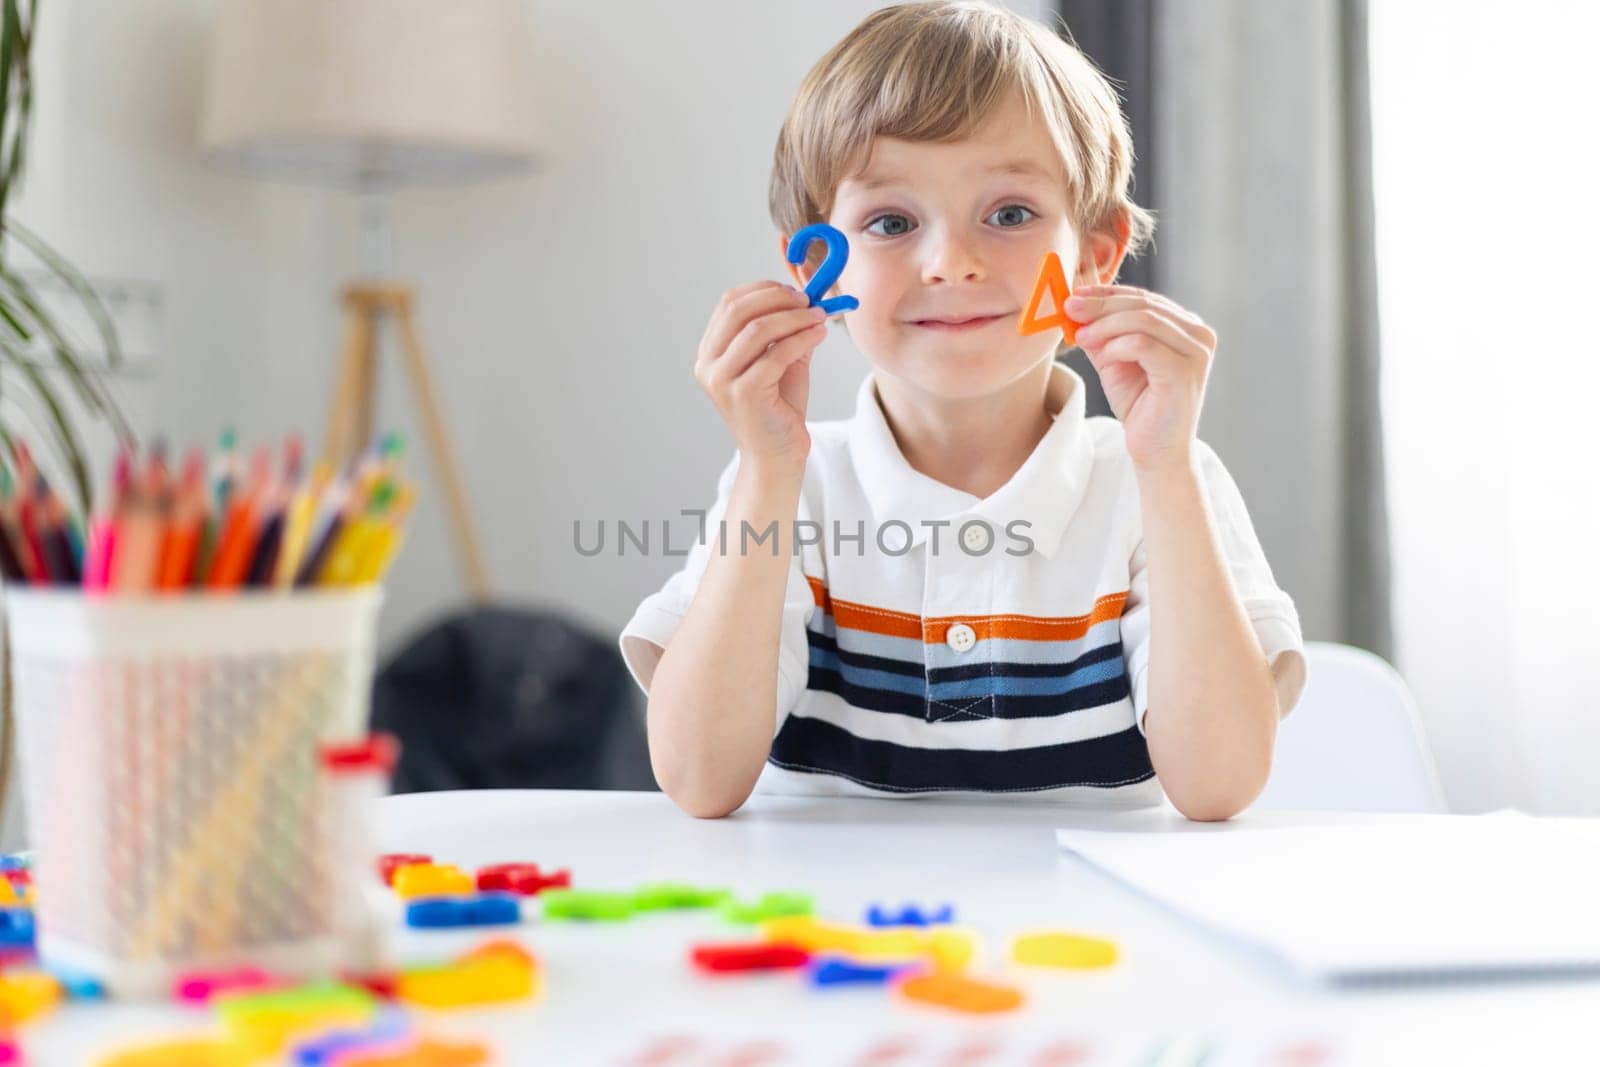 A young boy smiles at the camera while holding colorful geometric shapes, demonstrating a cheerful moment in a homeschooling environment.